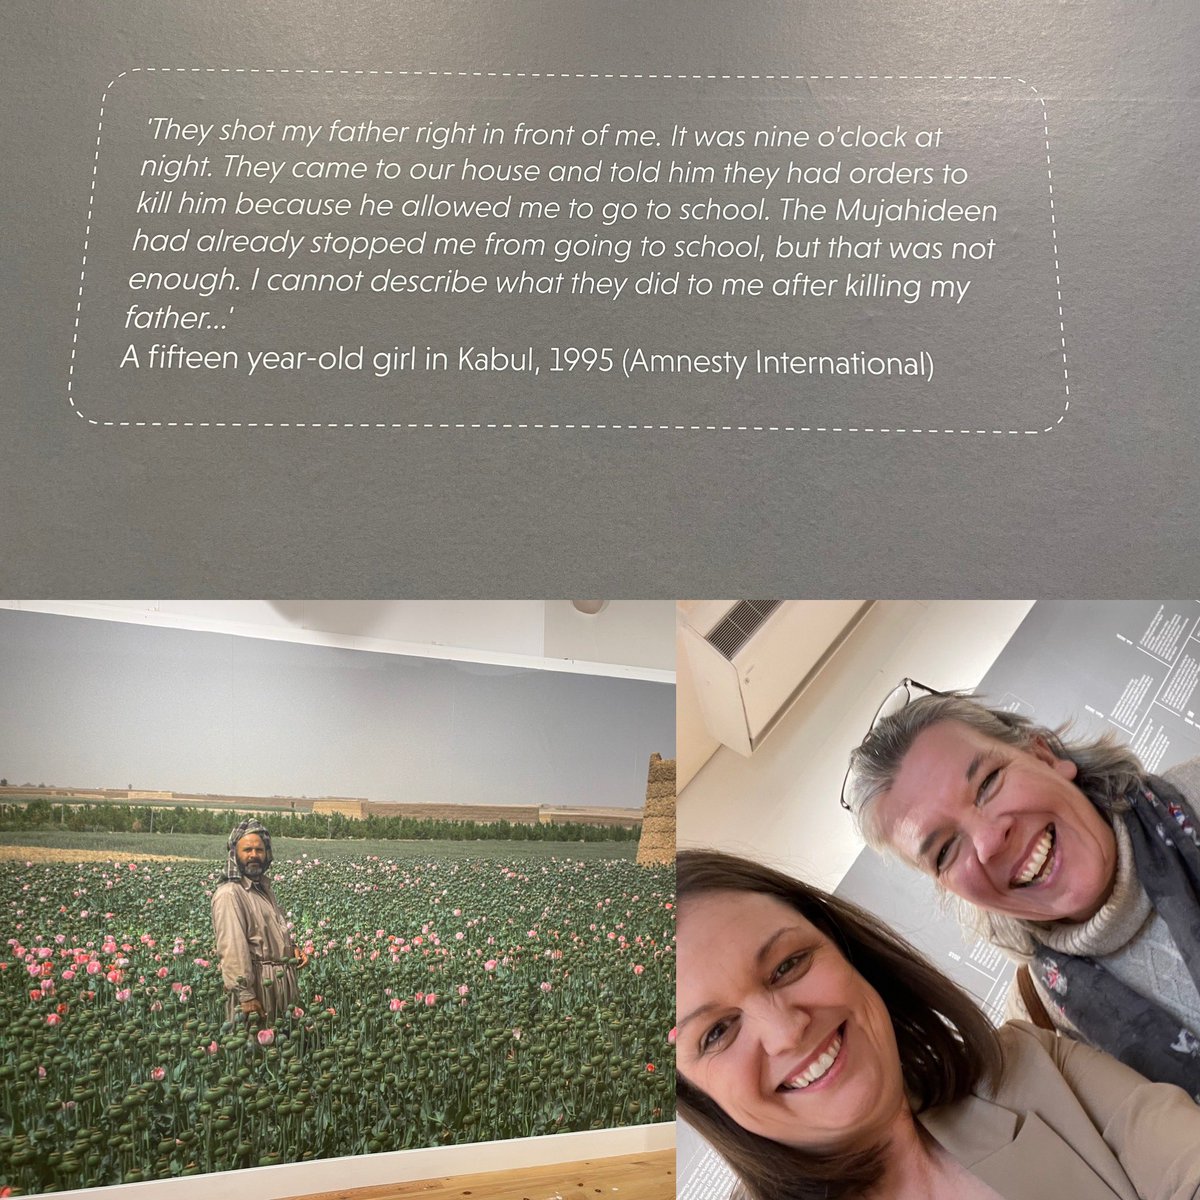 Yesterday I visited the incredible ‘We Are Here, Because You Were There’ exhibition. Heard from Afghan interpreters about their experiences & panellists about resettlement in 🏴󠁧󠁢󠁷󠁬󠁳󠁿. Definitely worth visiting - on til 25th March #nationofsanctuary #afghaninterpreters #ukresettlement